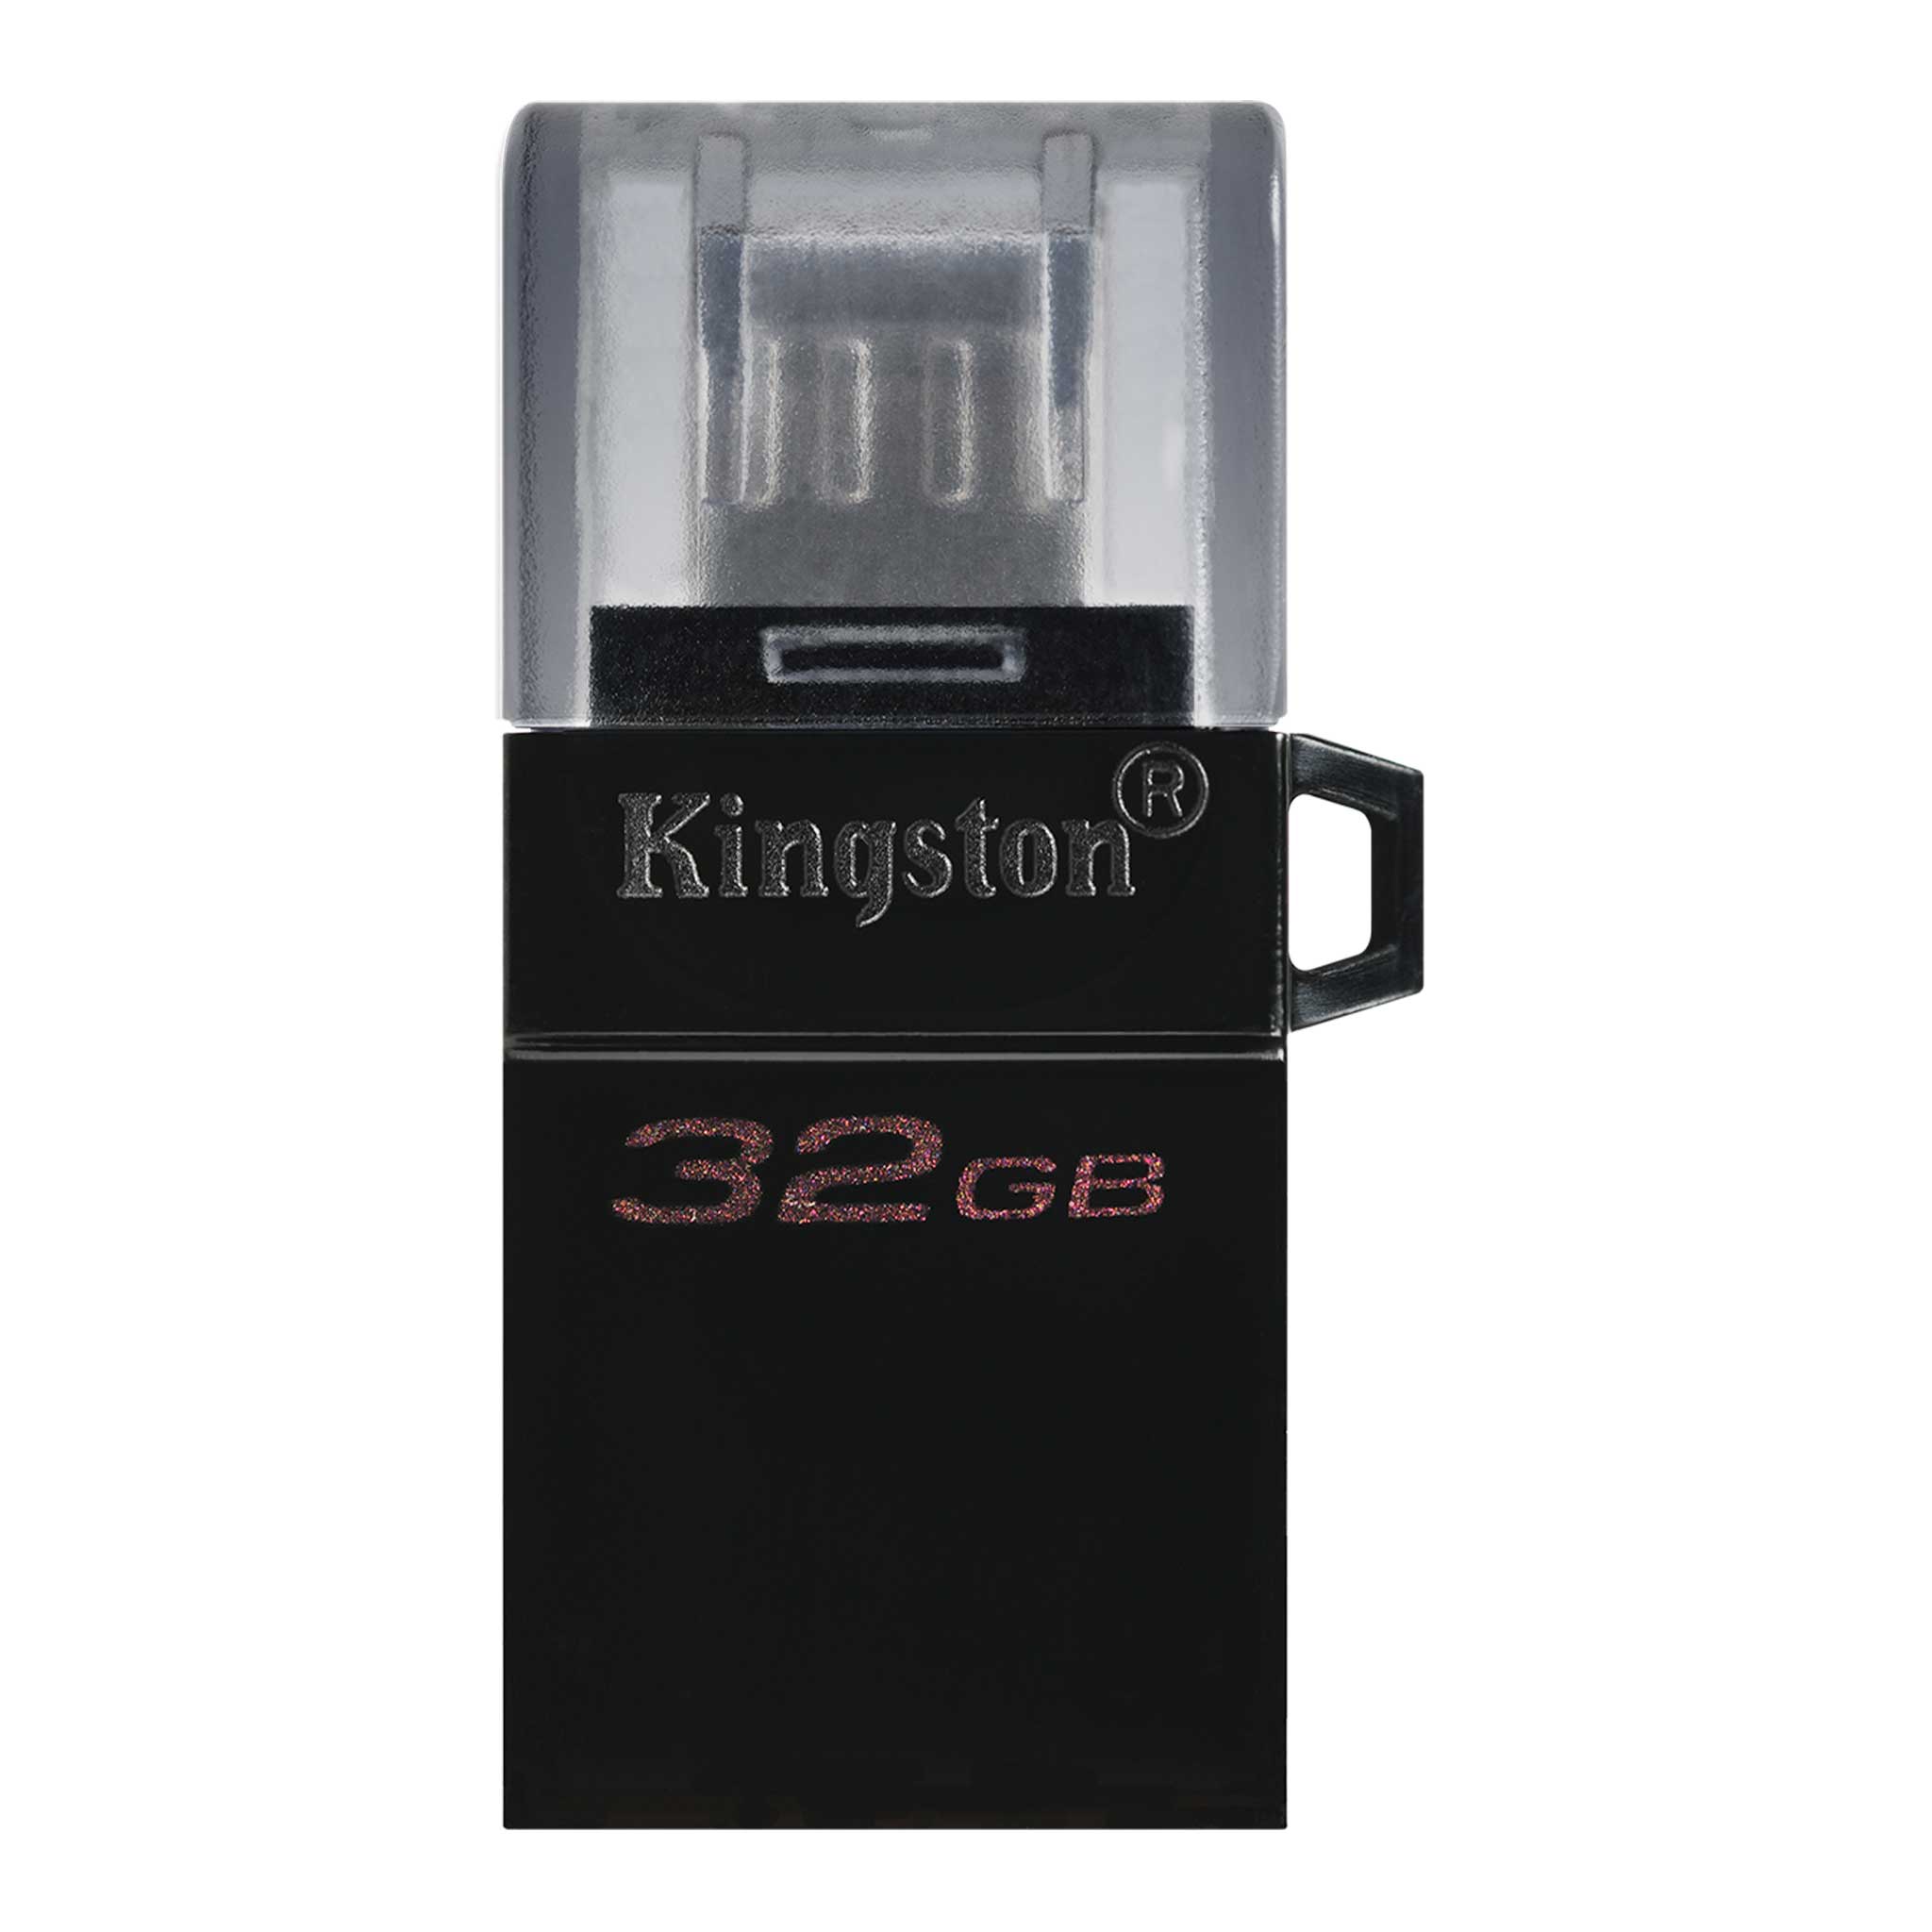 32GB Kingston DT MicroDuo 3, USB 3.0 (android/OTG)